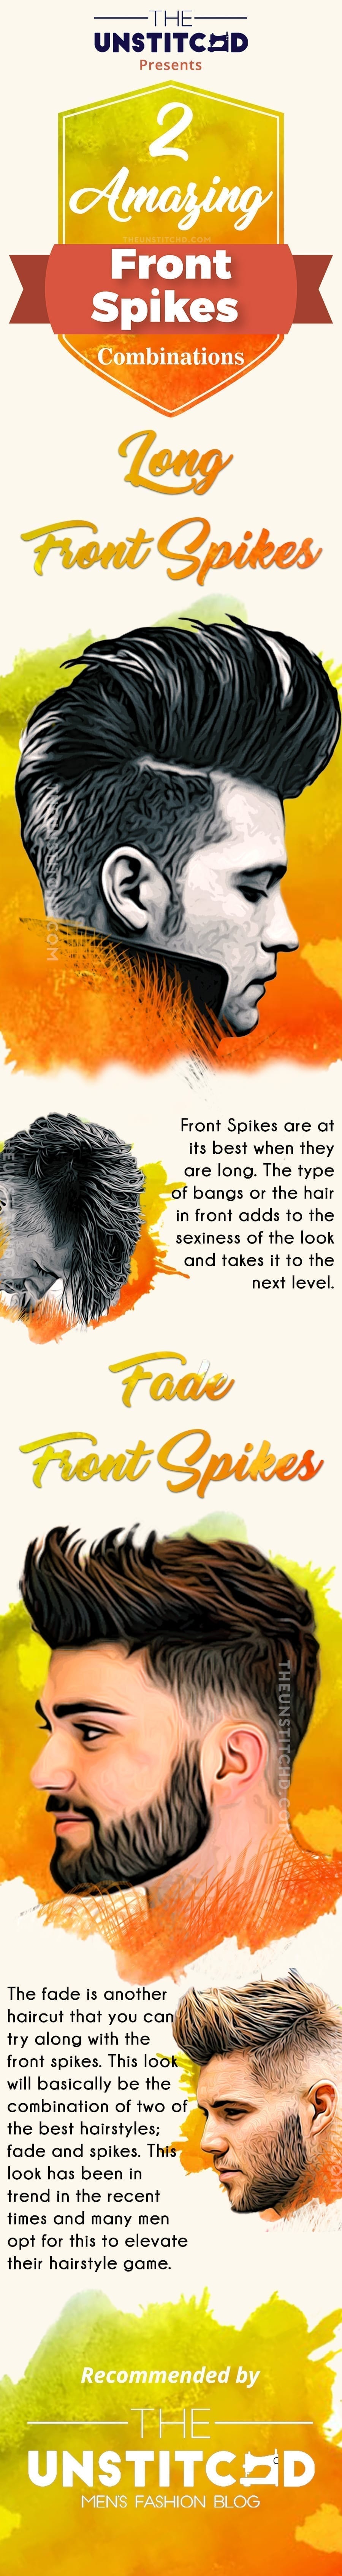 front-spikes-hairstyle-info